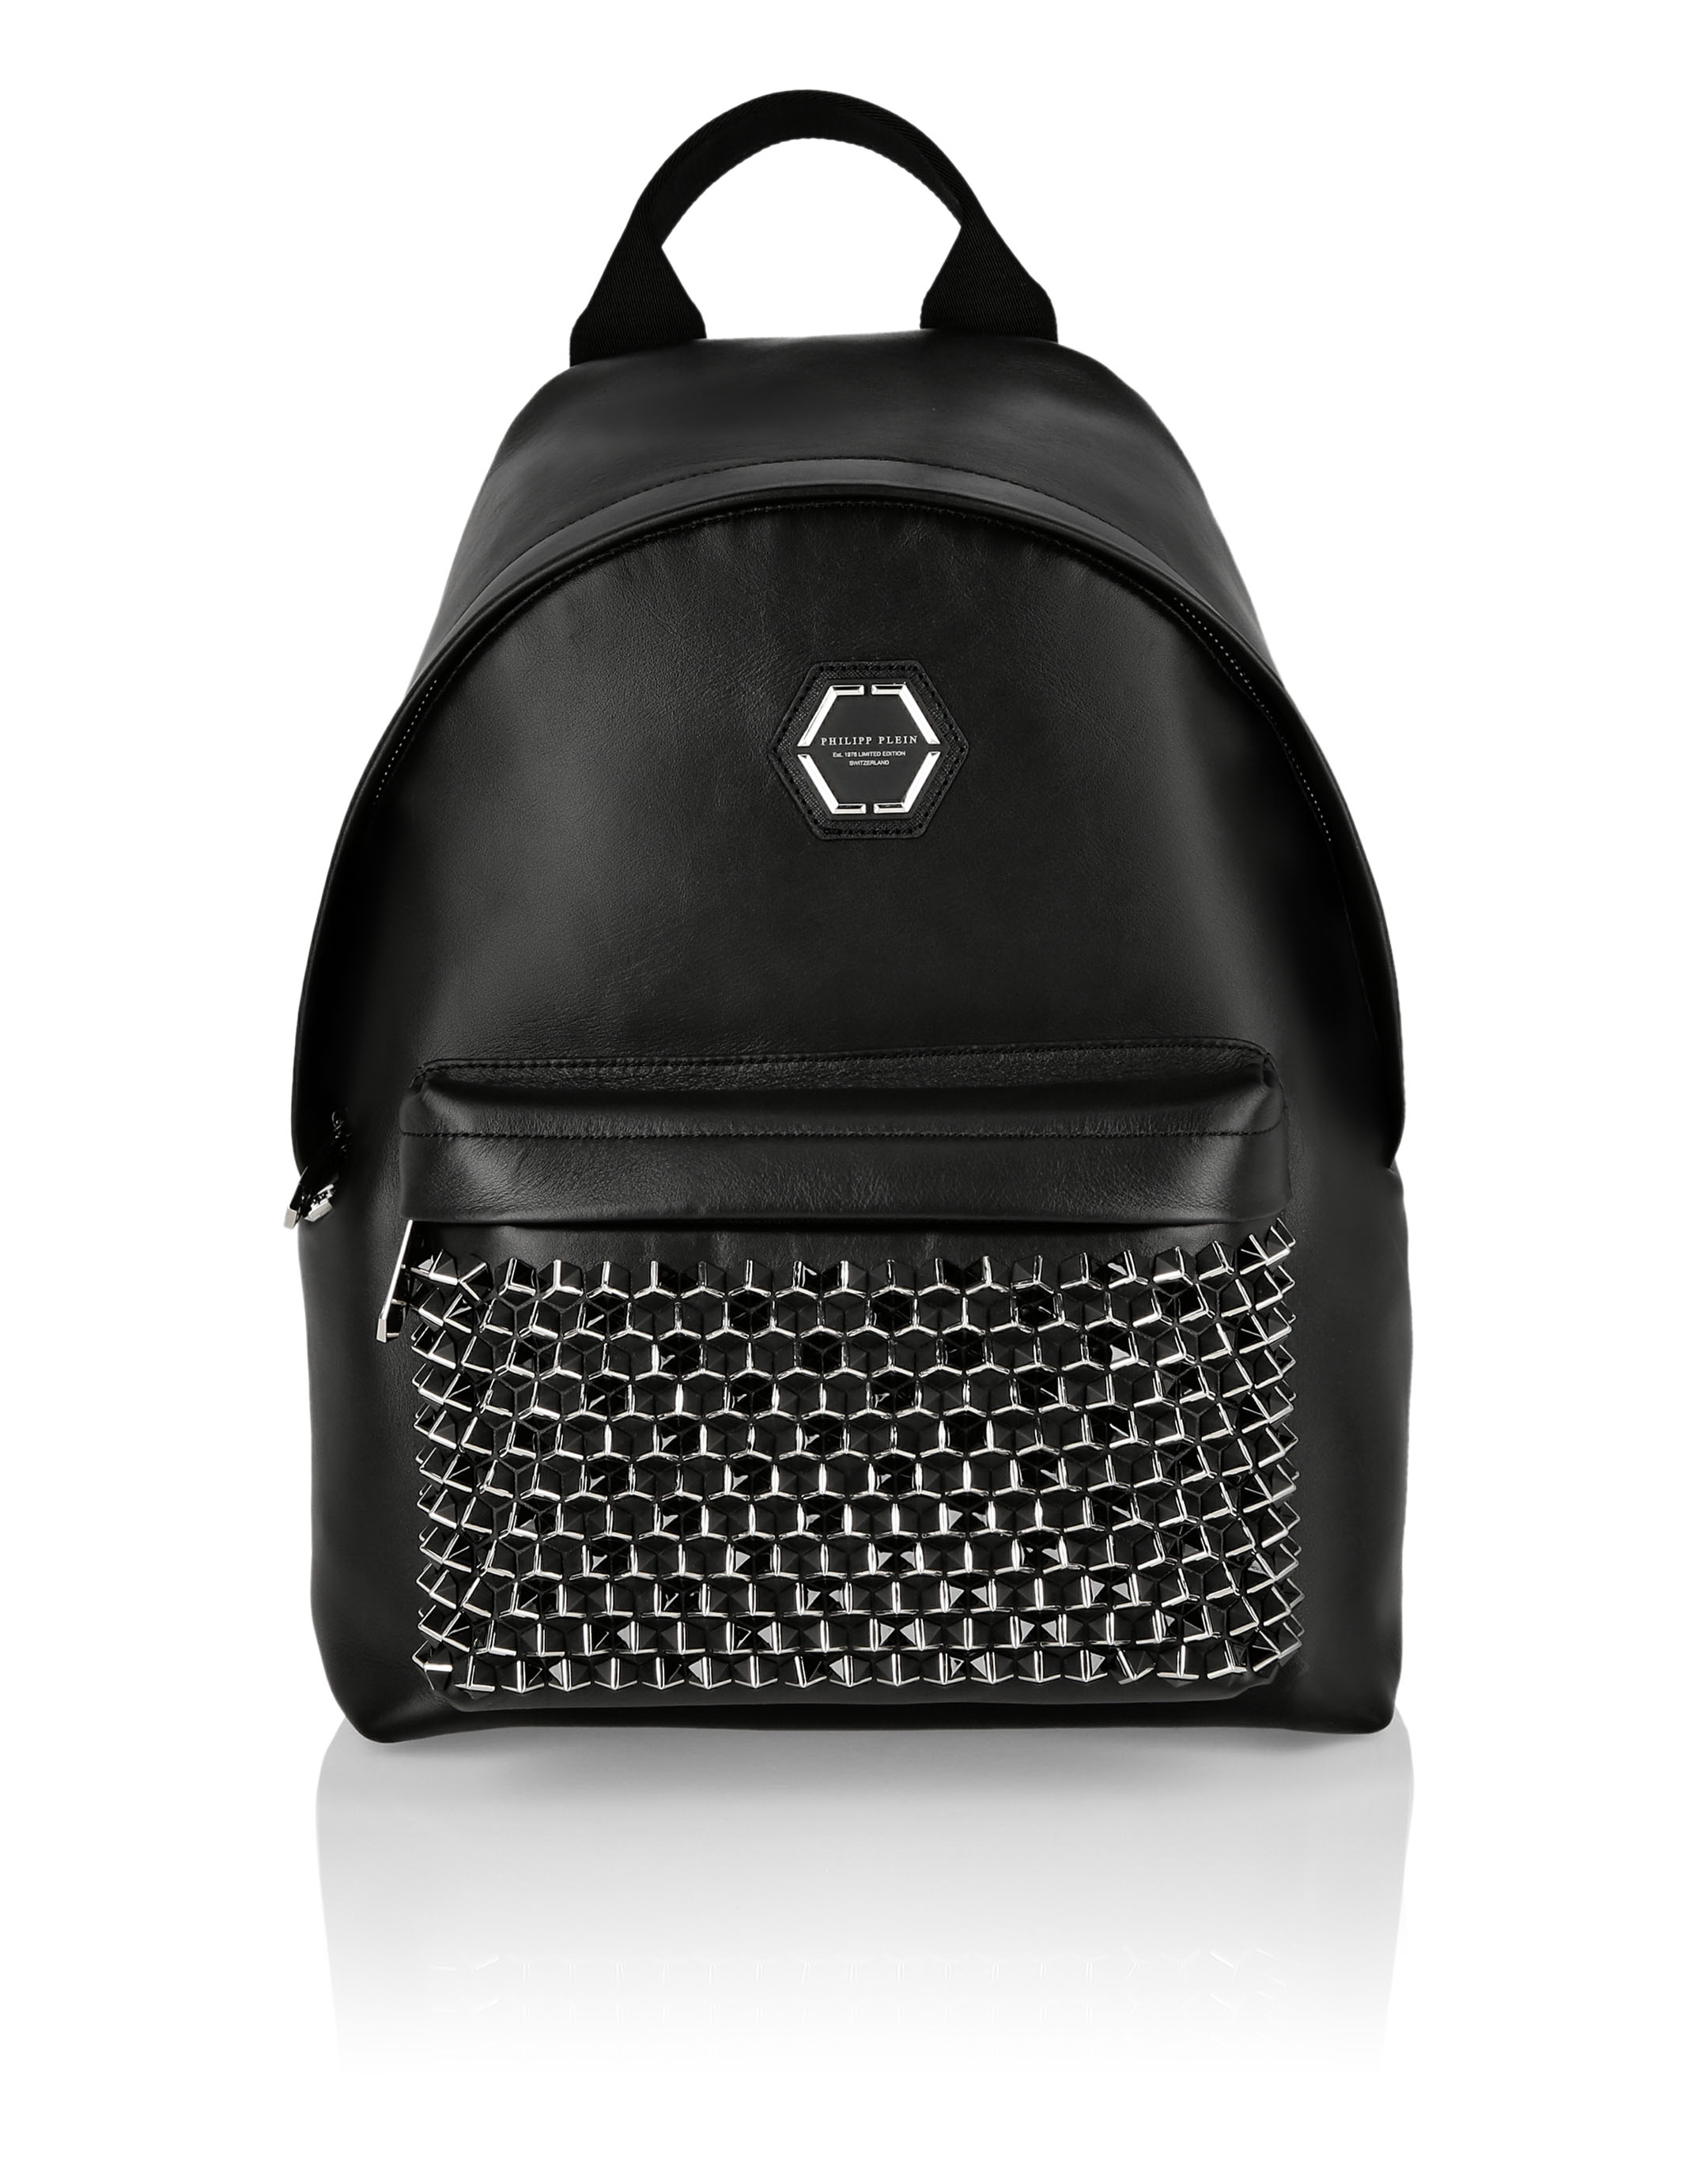 Backpack Hexagon and | Philipp Plein Outlet